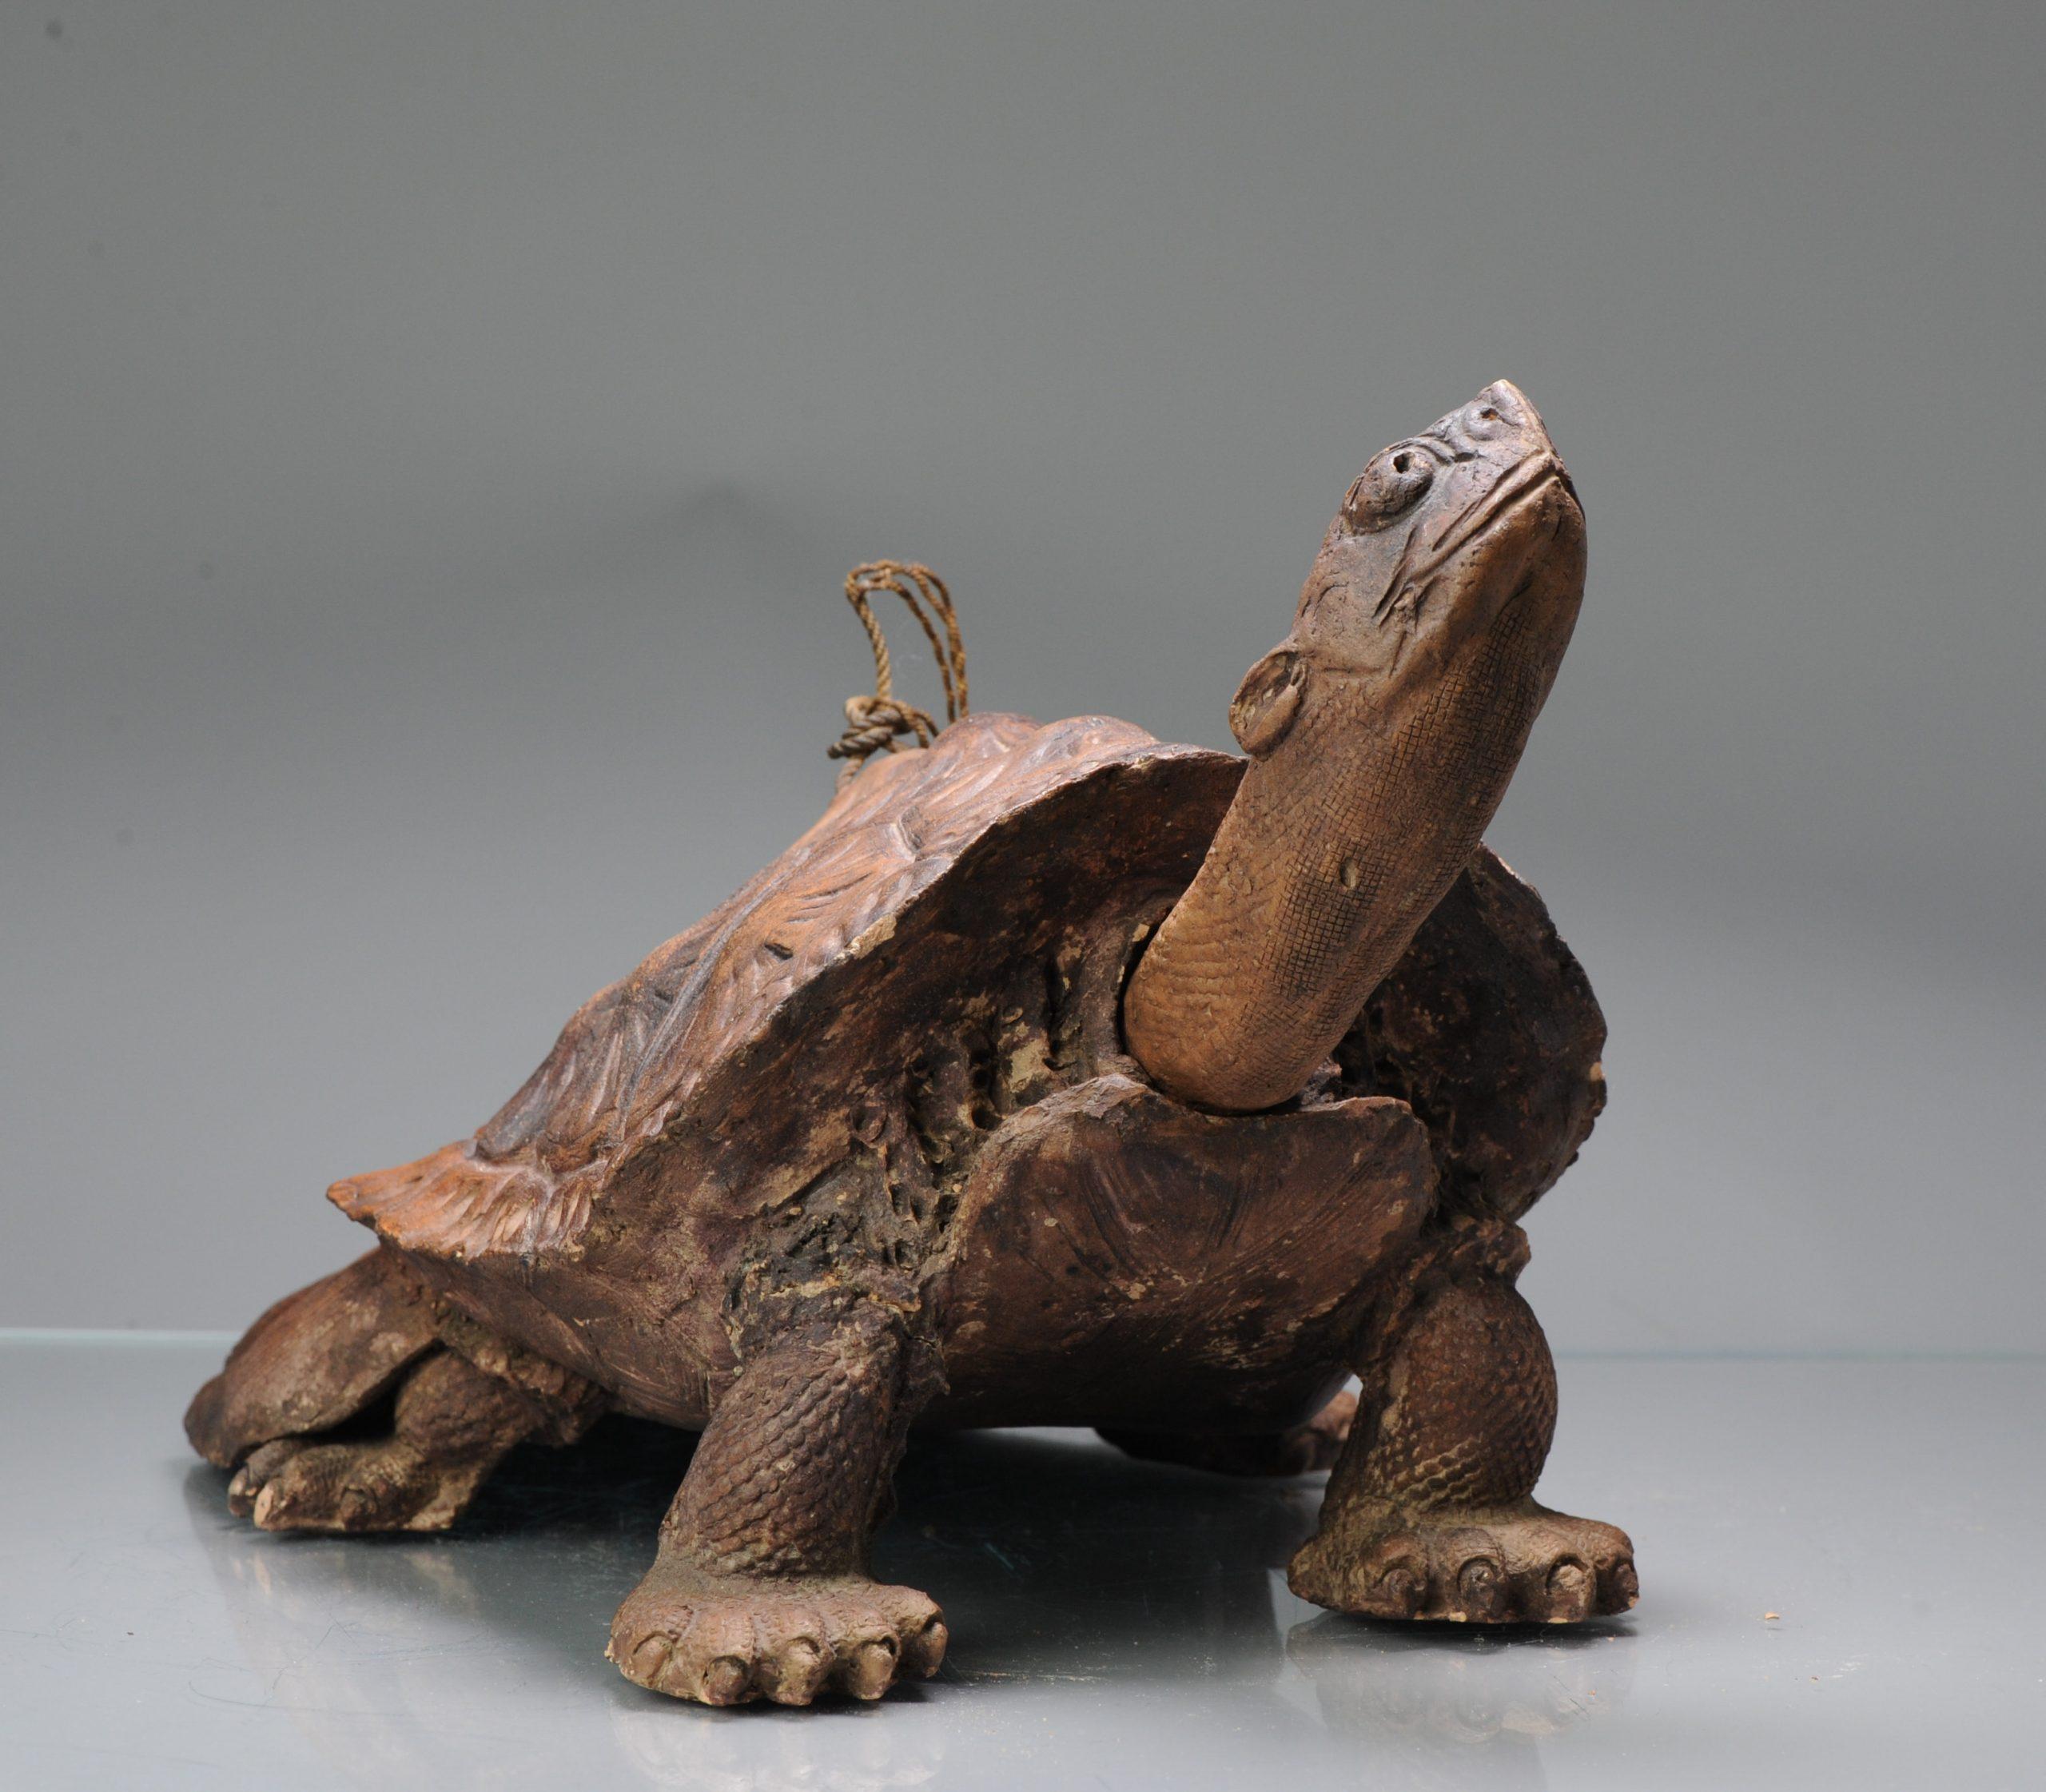 Antique Iwayaki Earthenware Edo Incense Burner of a Turtle 19th Century Japan, J In Good Condition For Sale In Amsterdam, Noord Holland